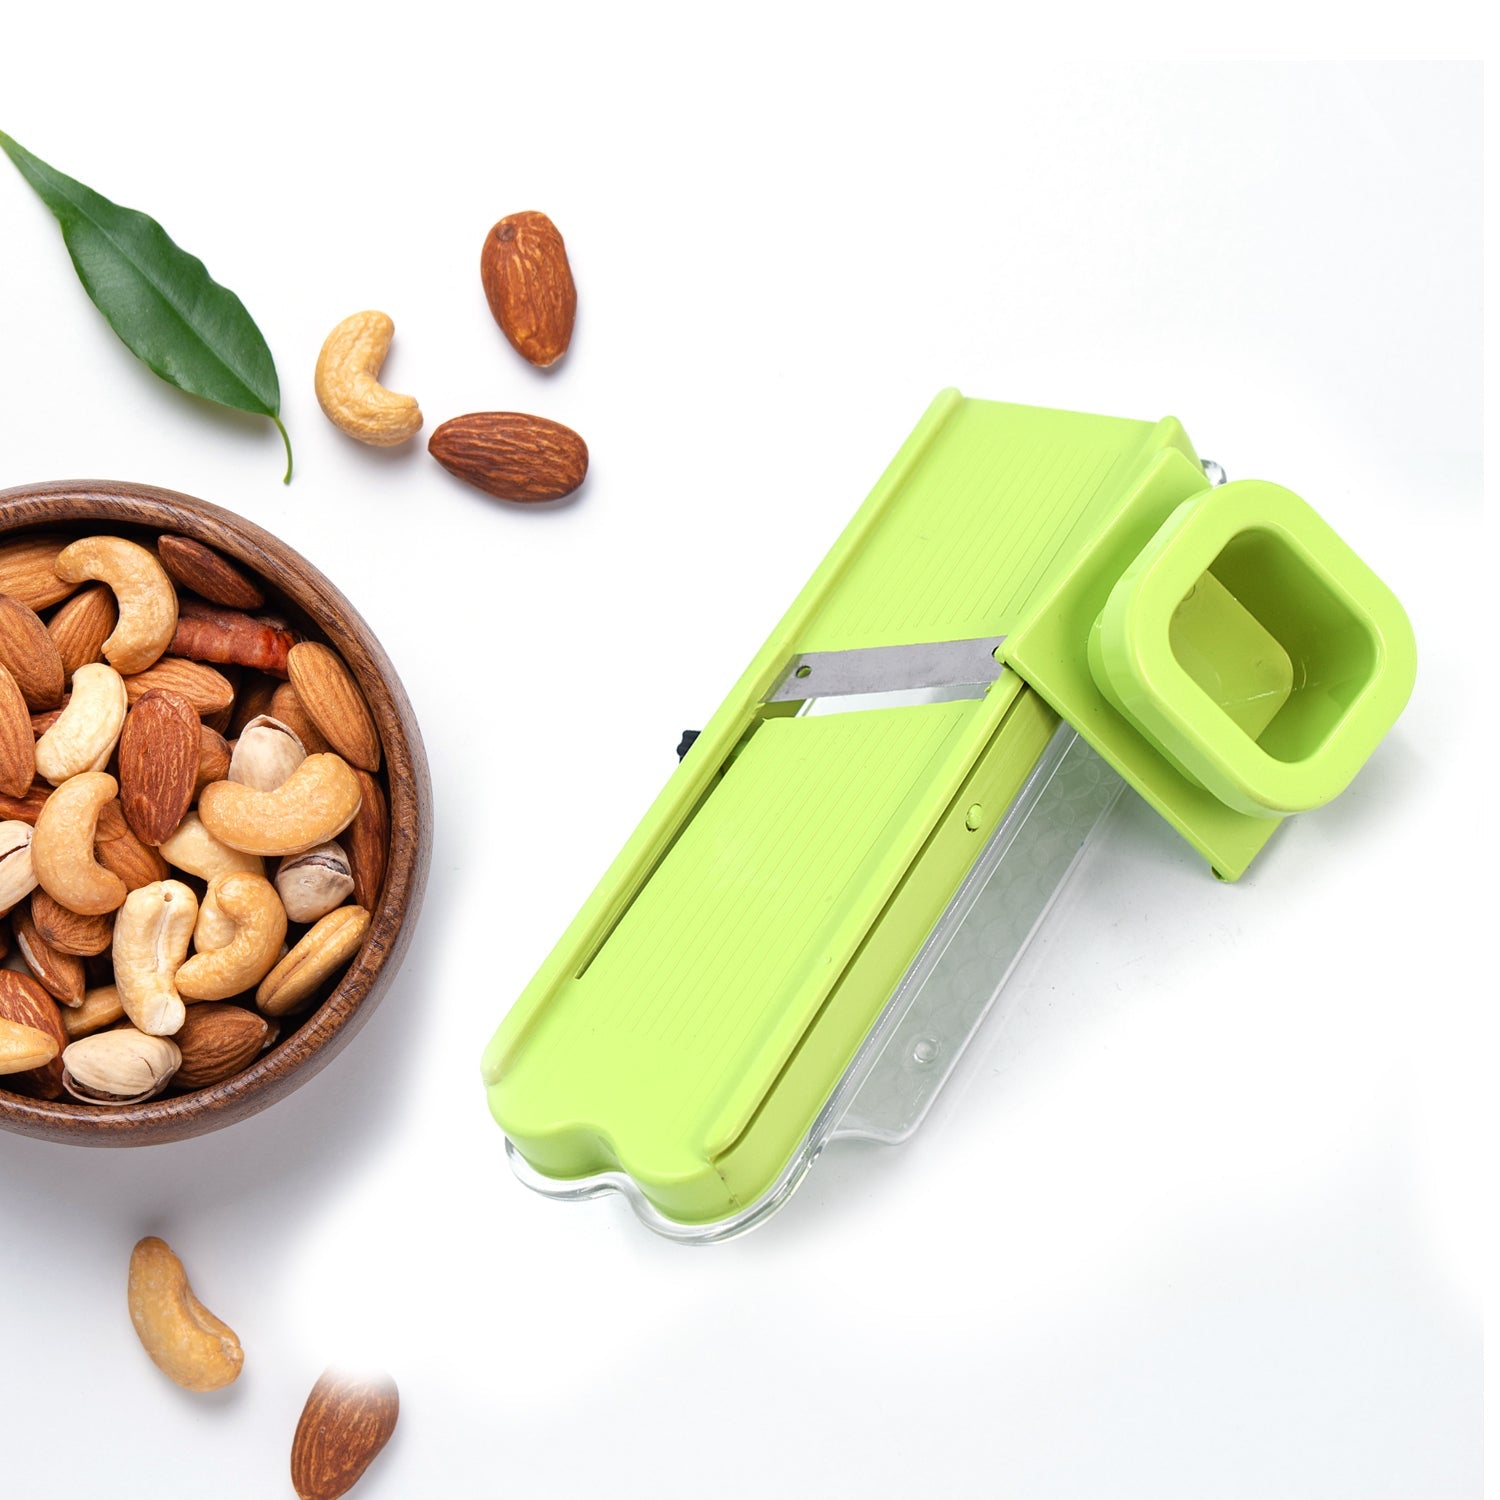 Stainless Steel Vegetable and Dry Fruit Slicer / Cutter